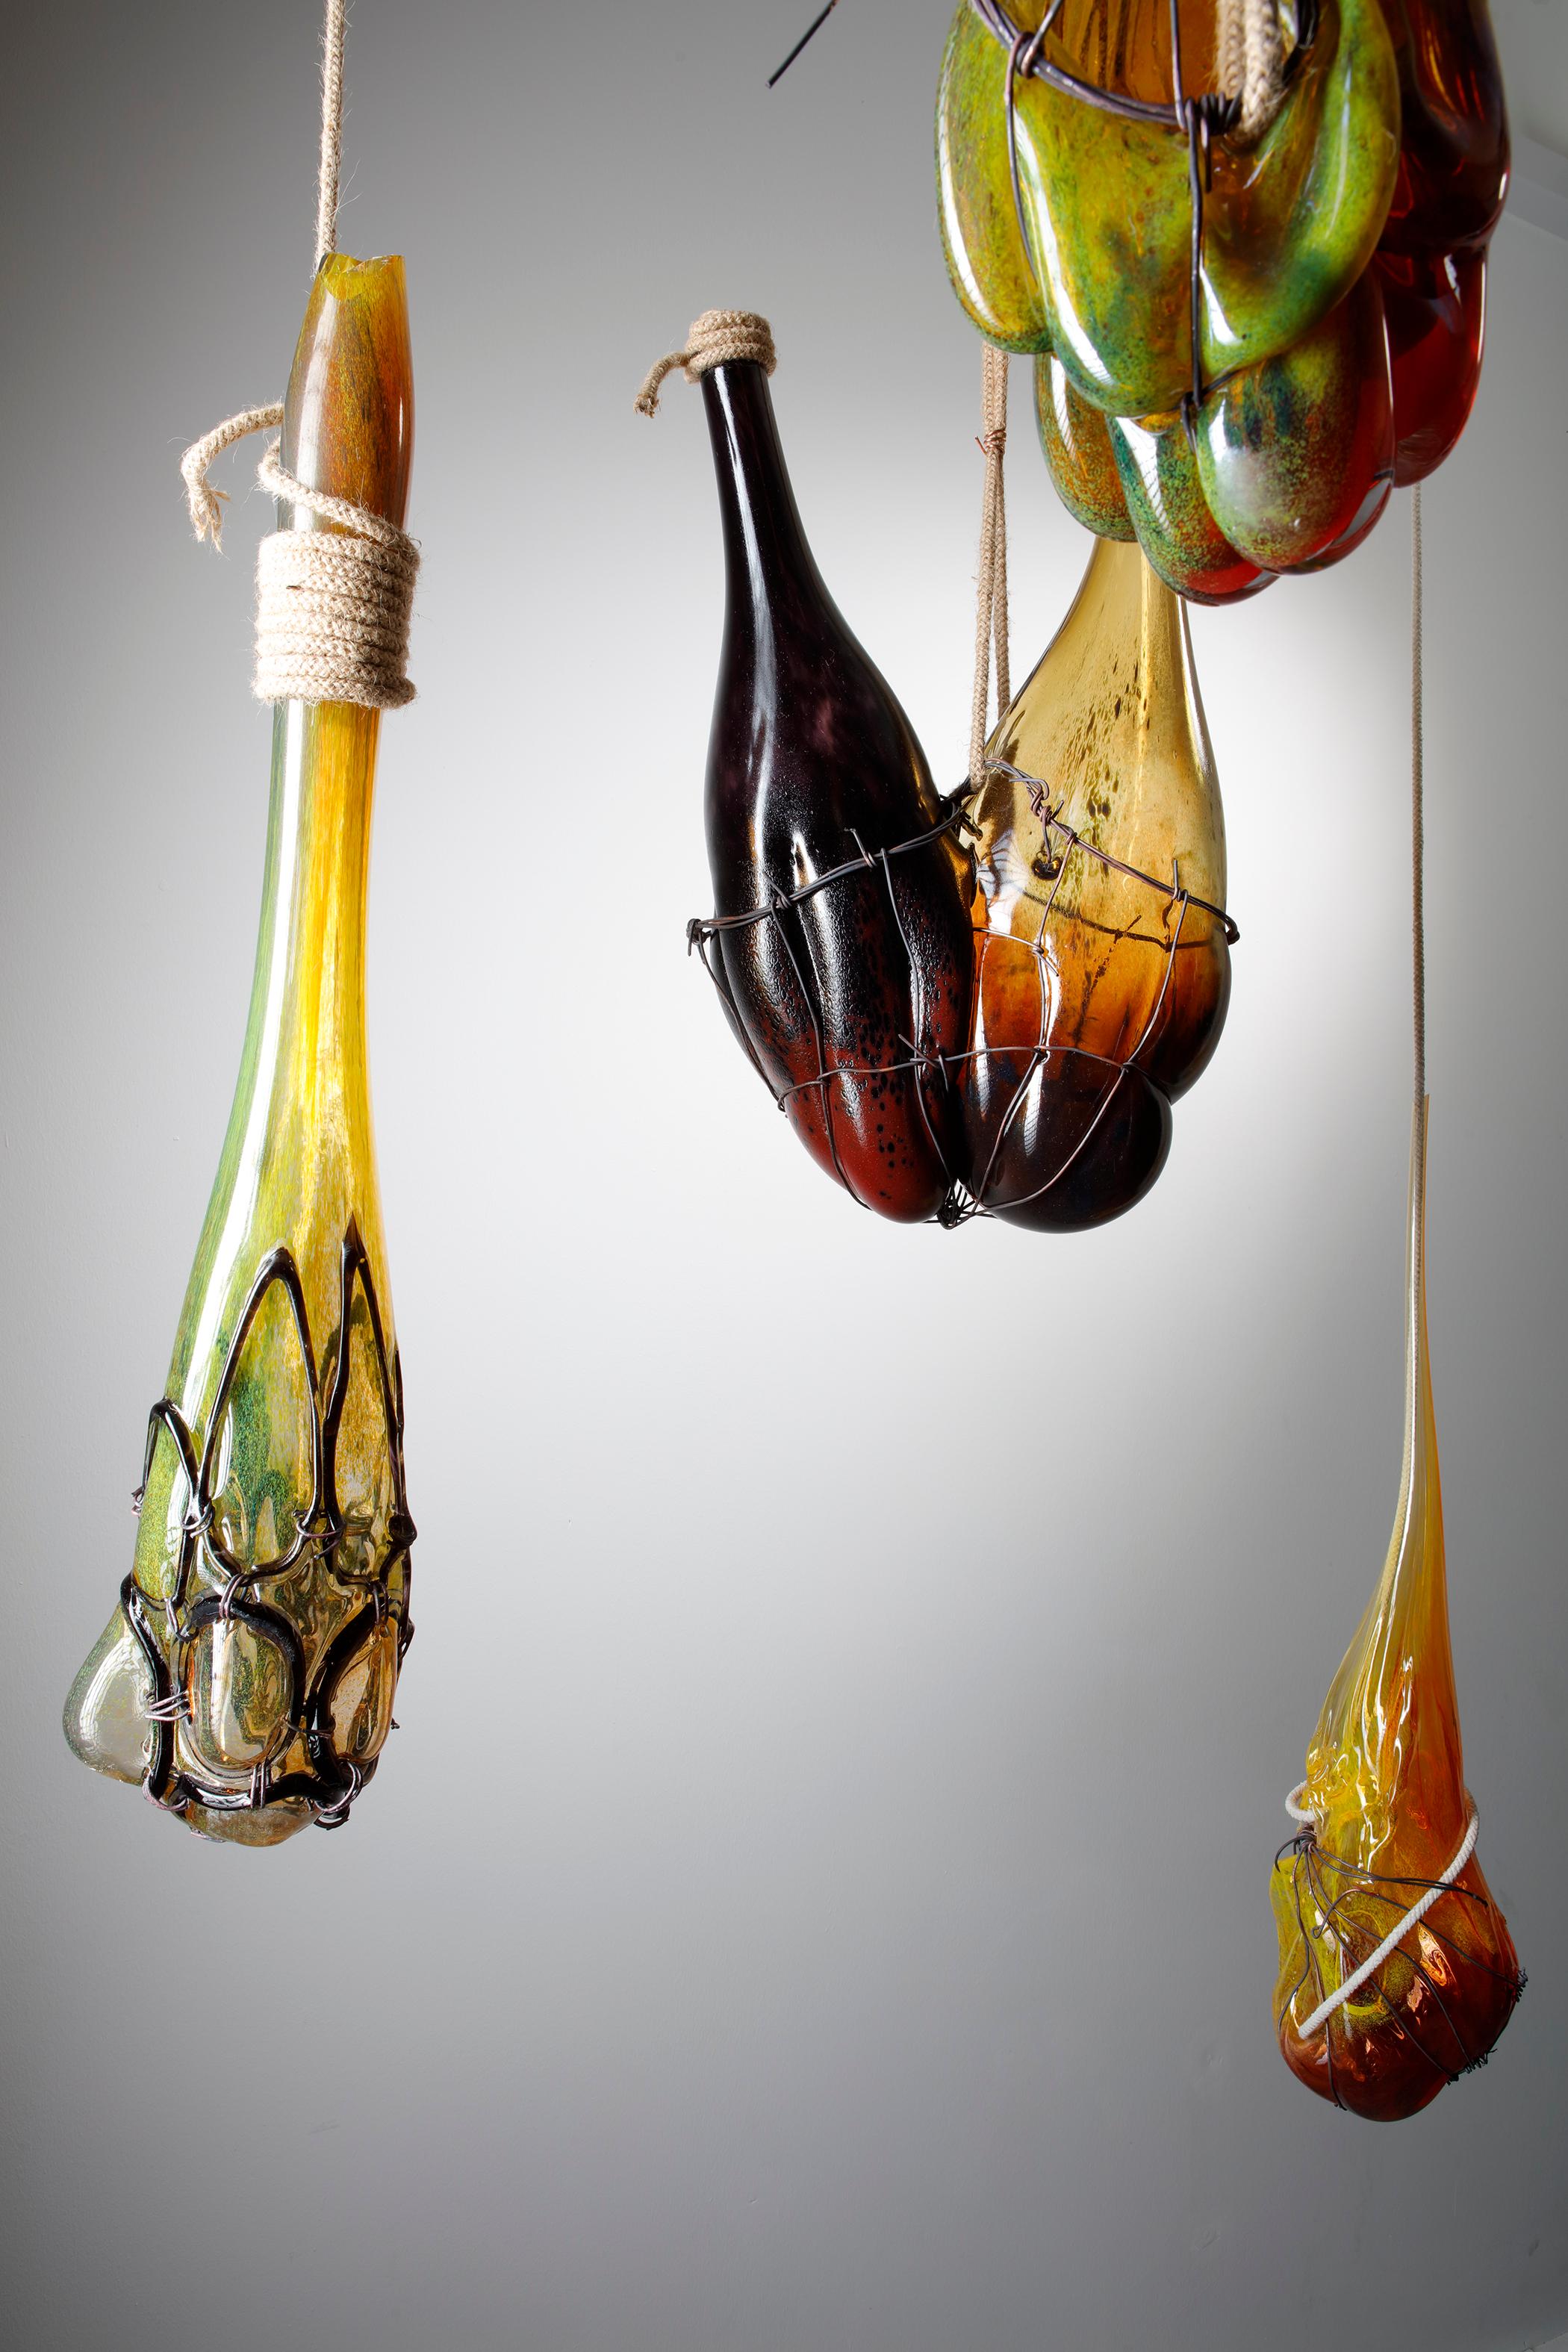 Contemporary Strange Fruit Installation, a Unique Glass Hanging Sculpture by Chris Day For Sale